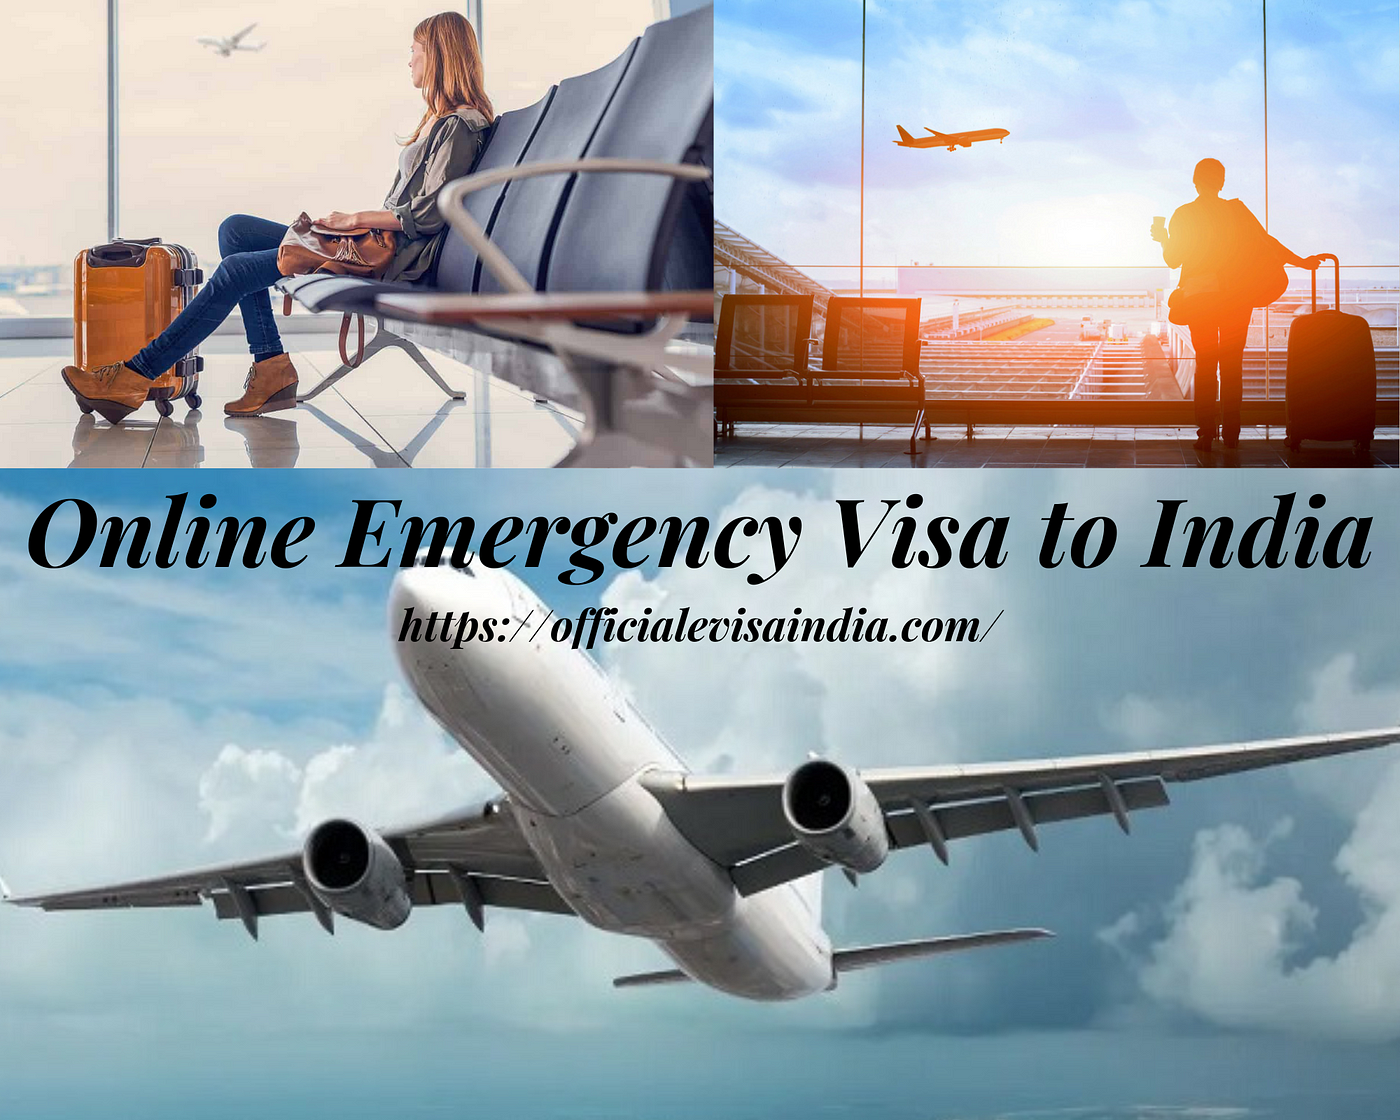 URGENT EMERGENCY INDIAN VISA: Everything You Need to Know